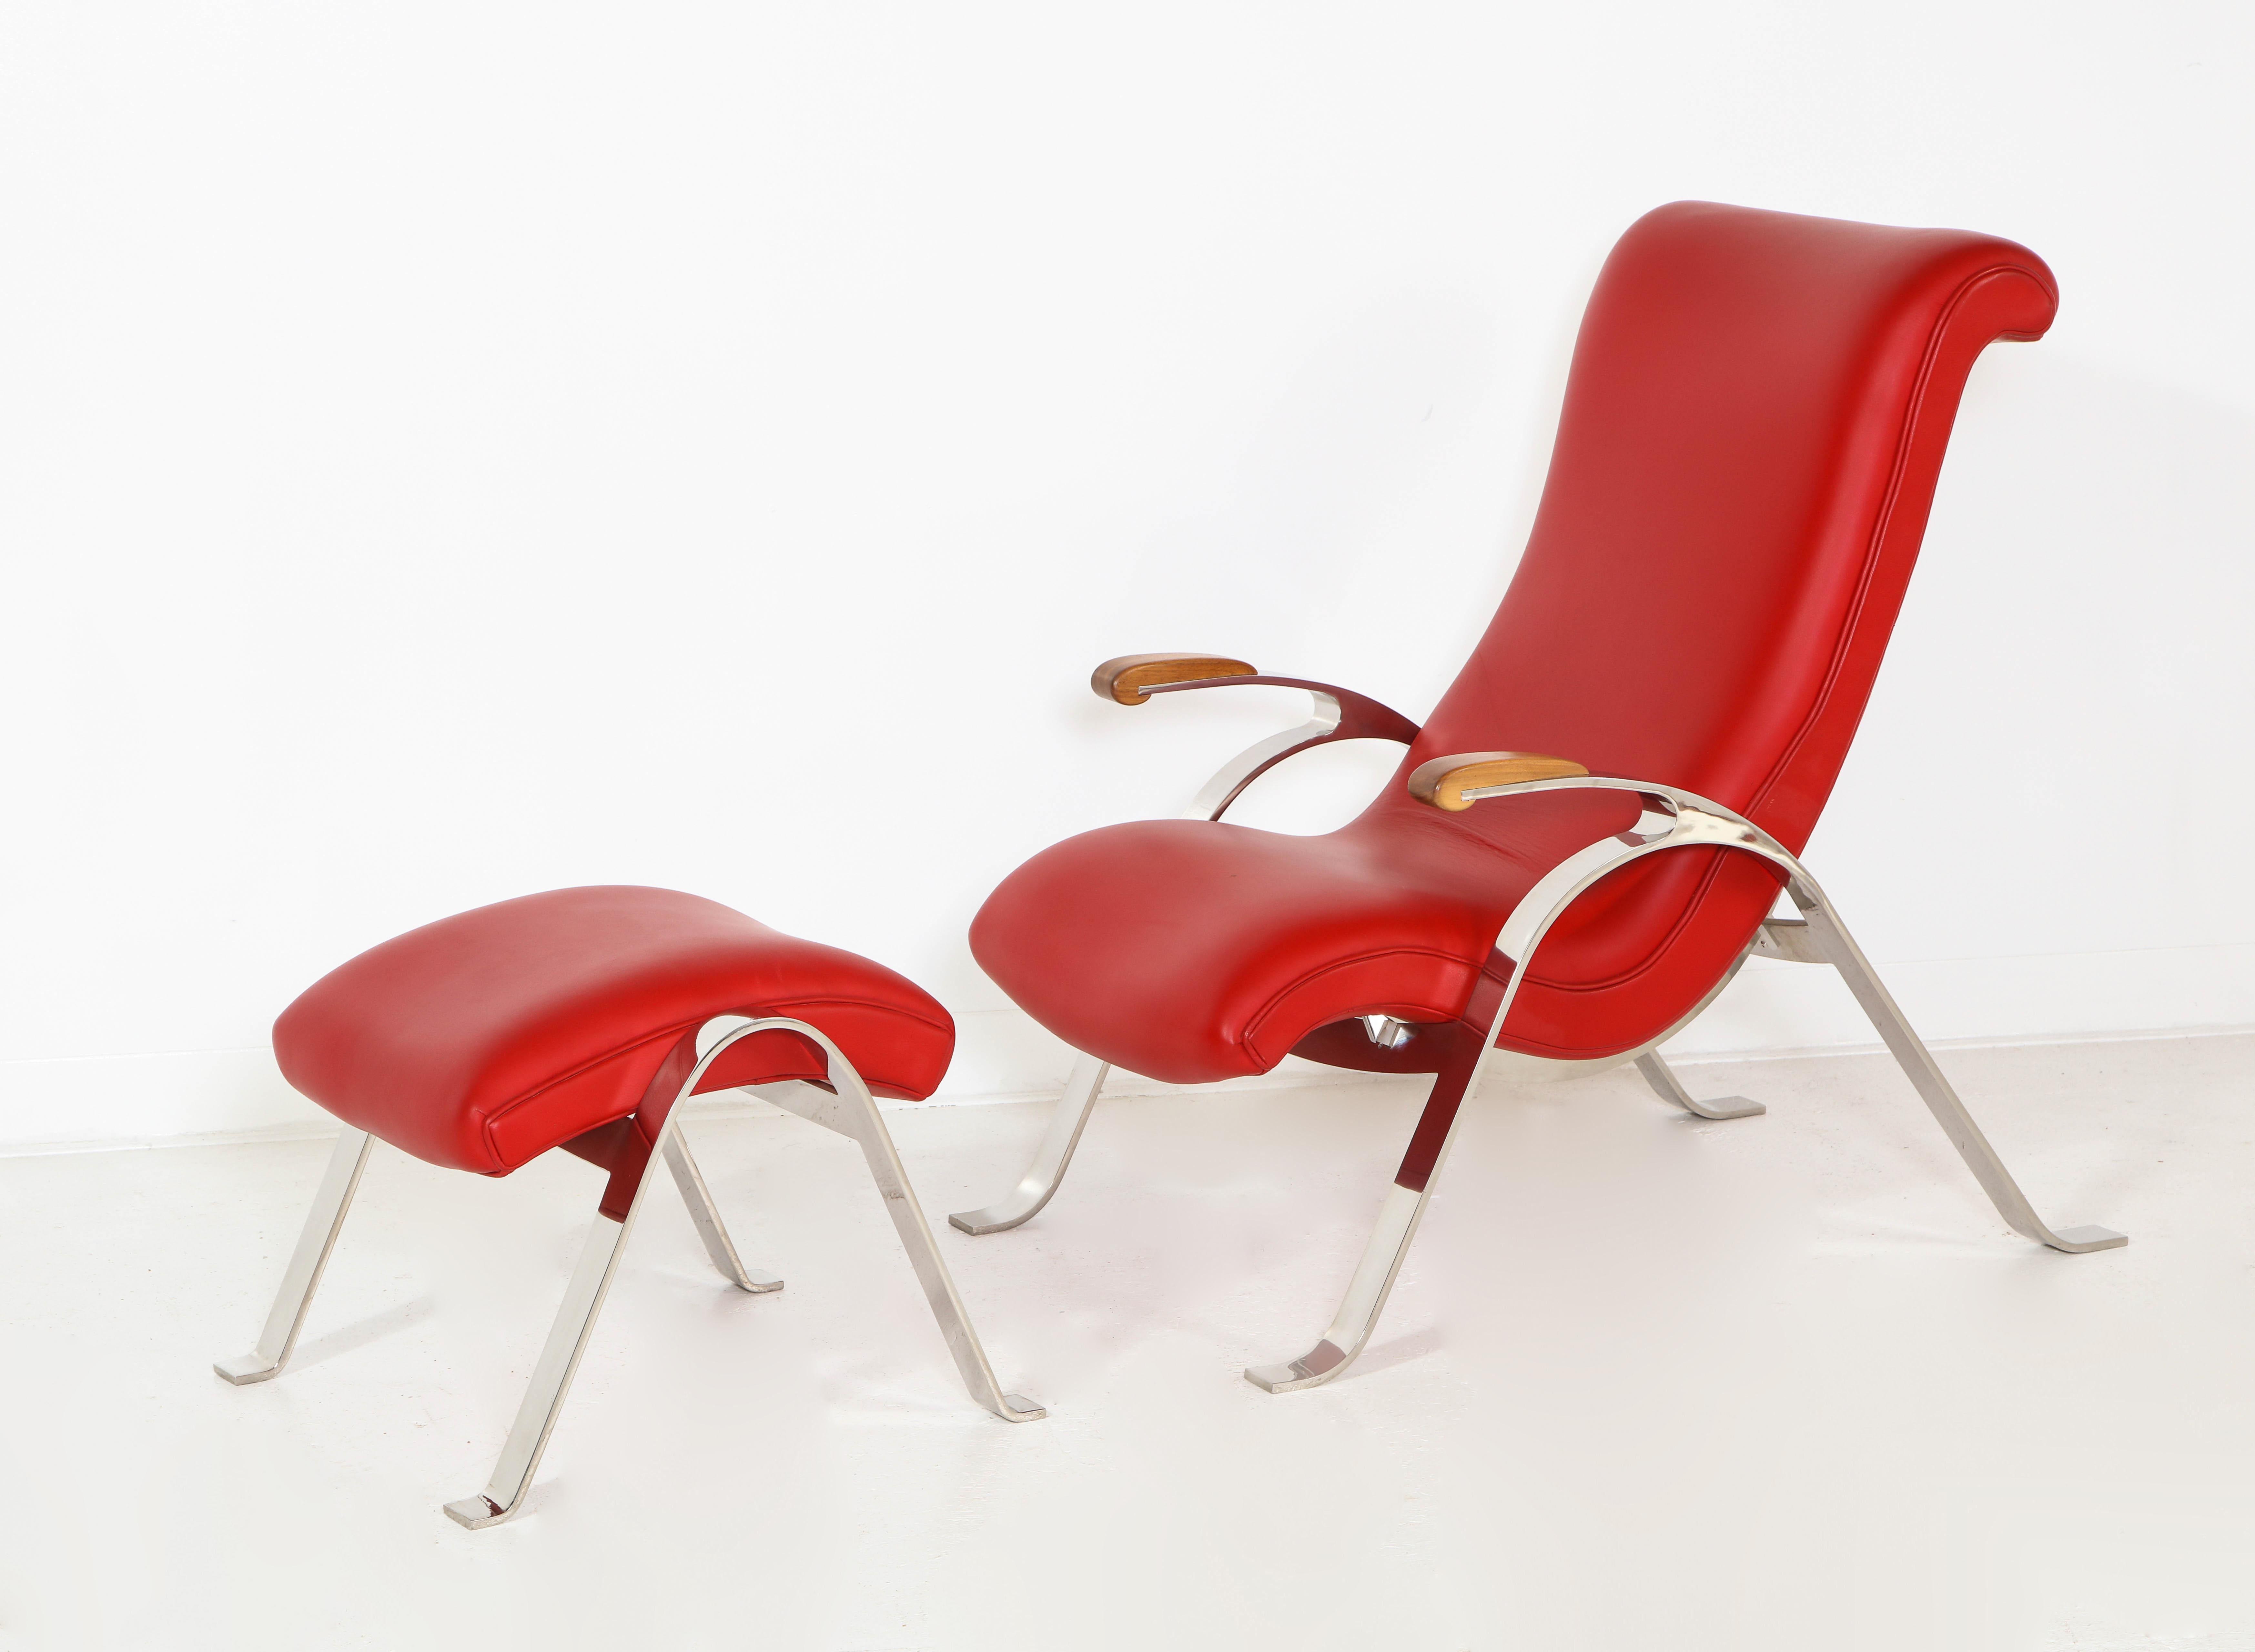 Contemporary Foot Stool in Red Offered by Vladimir Kagan Design Group For Sale